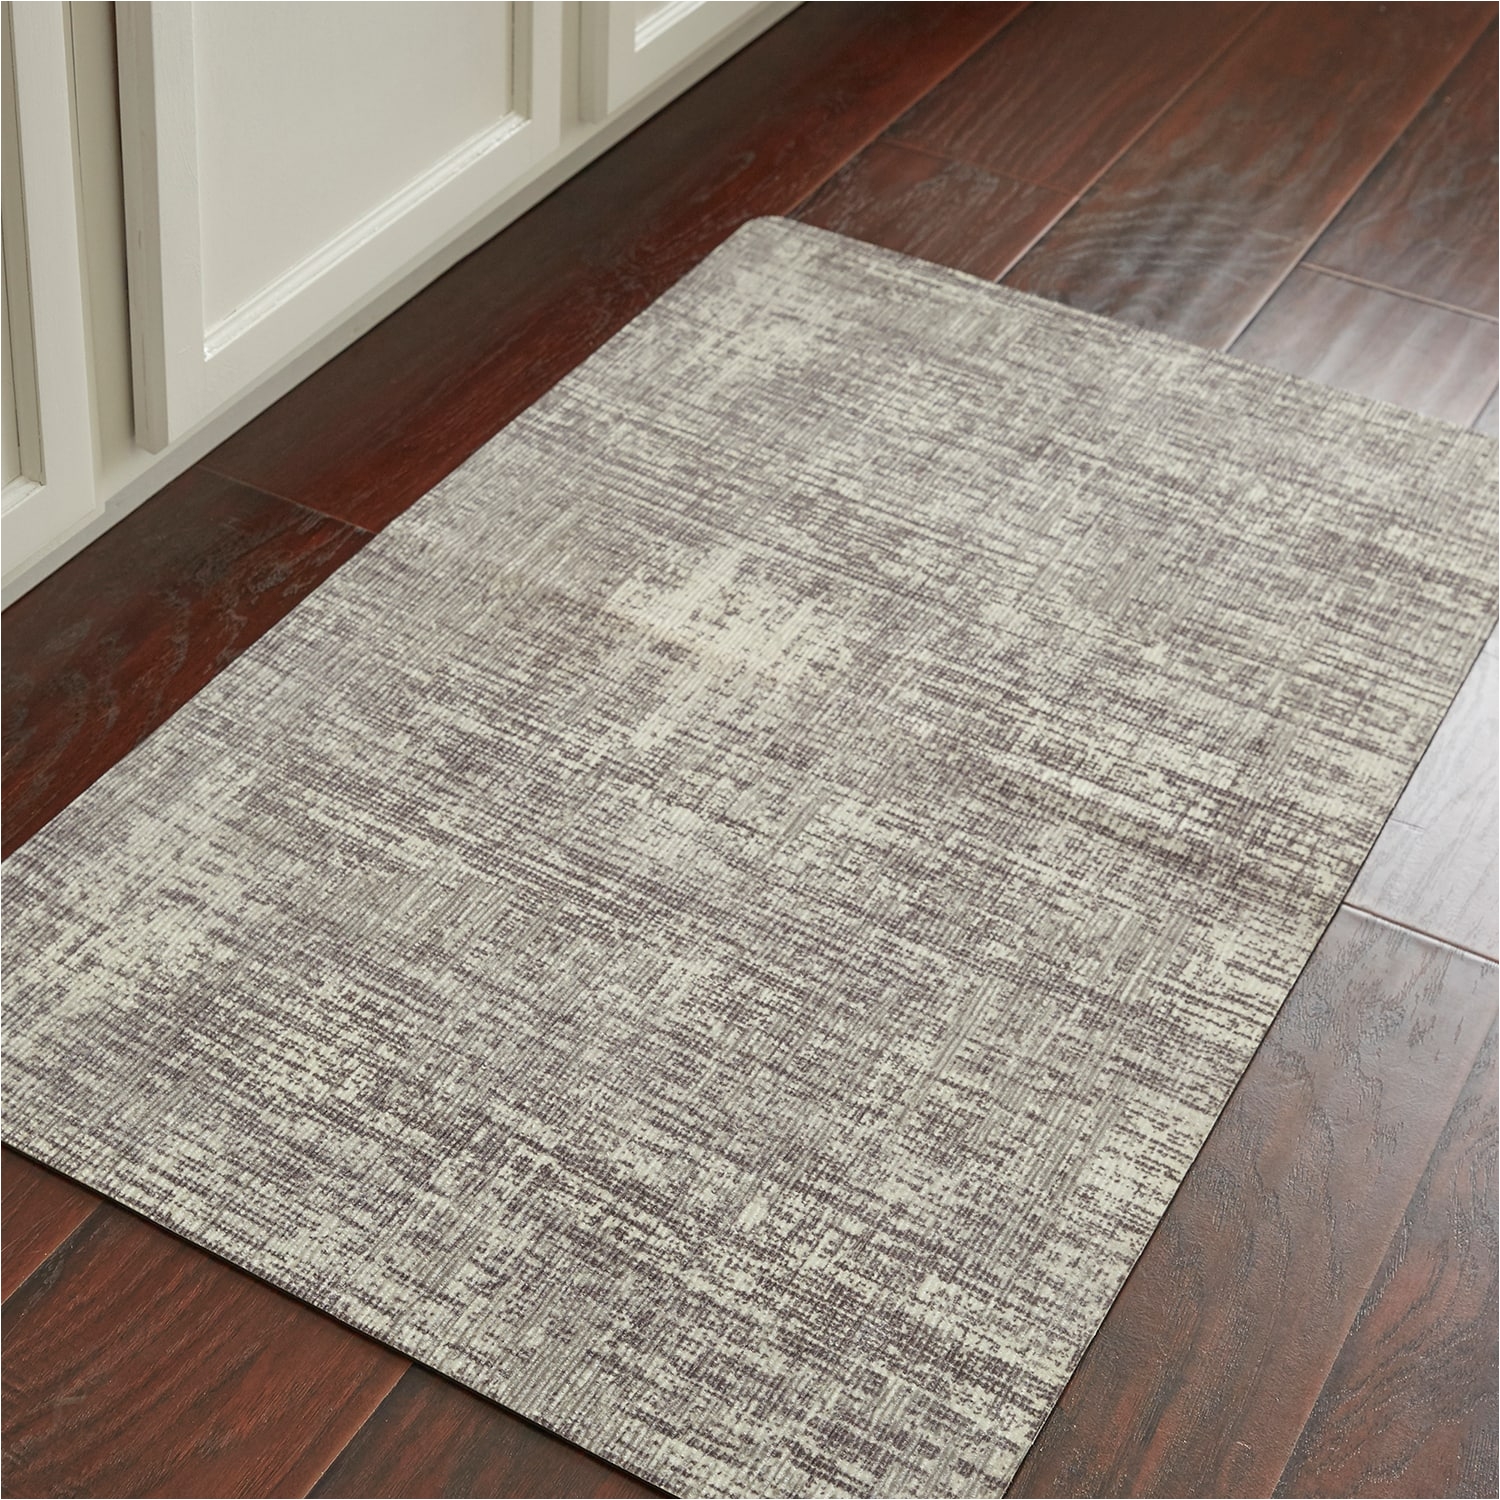 Kohls Rugs Clearance Grey Kitchen Rugs Home Decor Kohl S